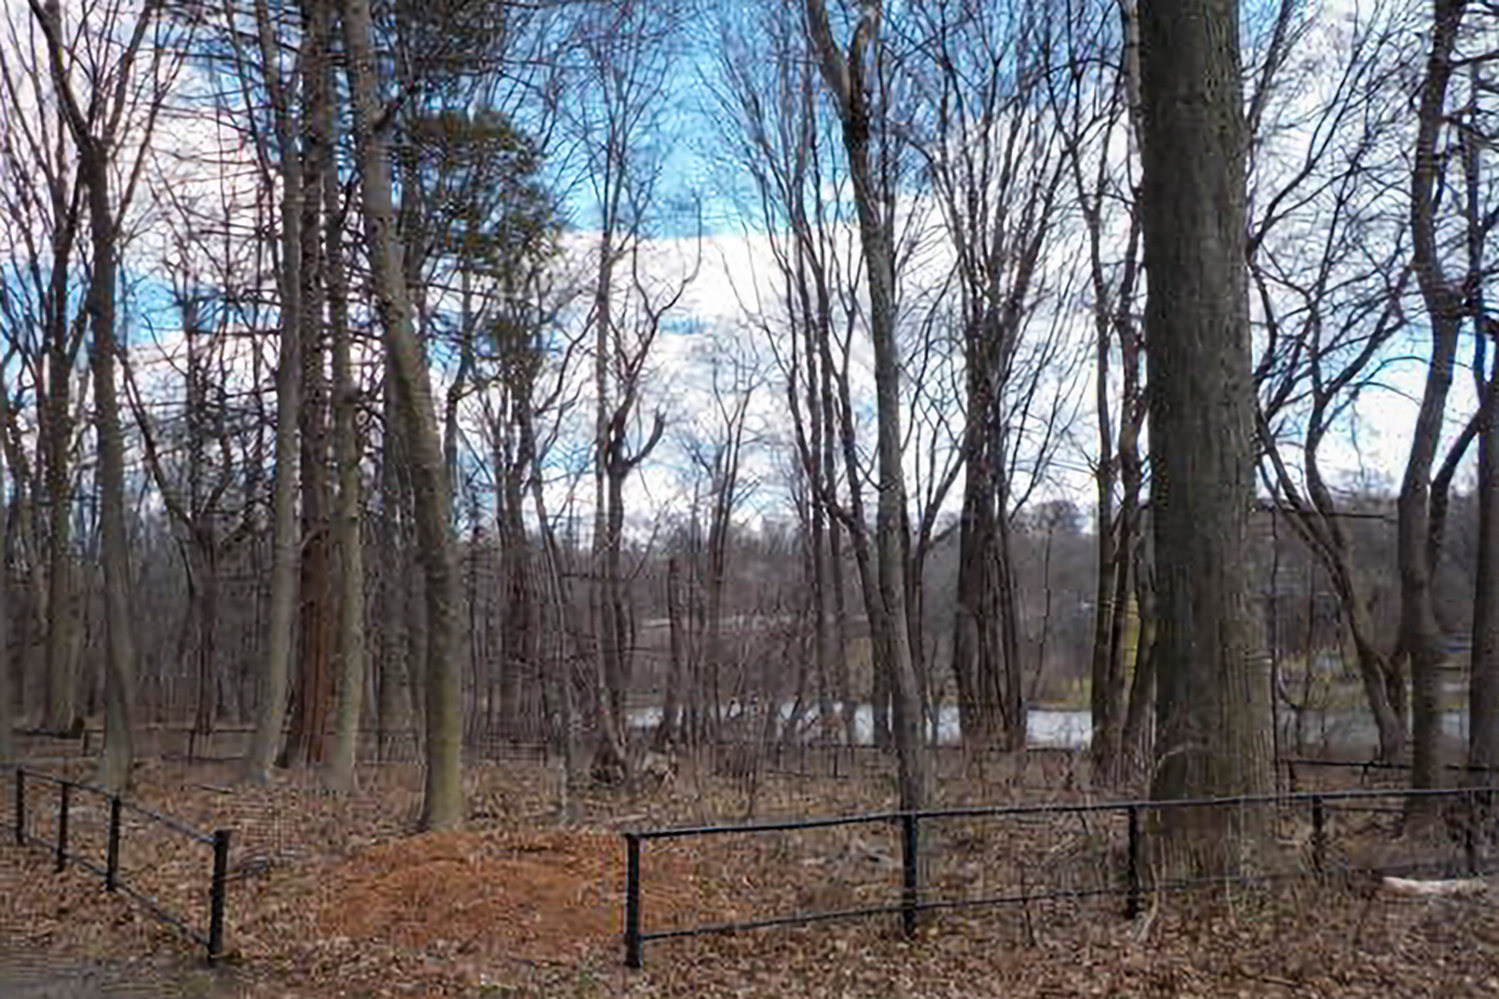 The Kingsbridge Burial Grounds are among at least a pair of cemeteries in Van Cortlandt Park — the other most prominent one, the enslaved African burial grounds closer to the lake. Community members and historians will gather at the enslaved African grounds June 19 to consecrate their final resting place in observance of Juneteenth.